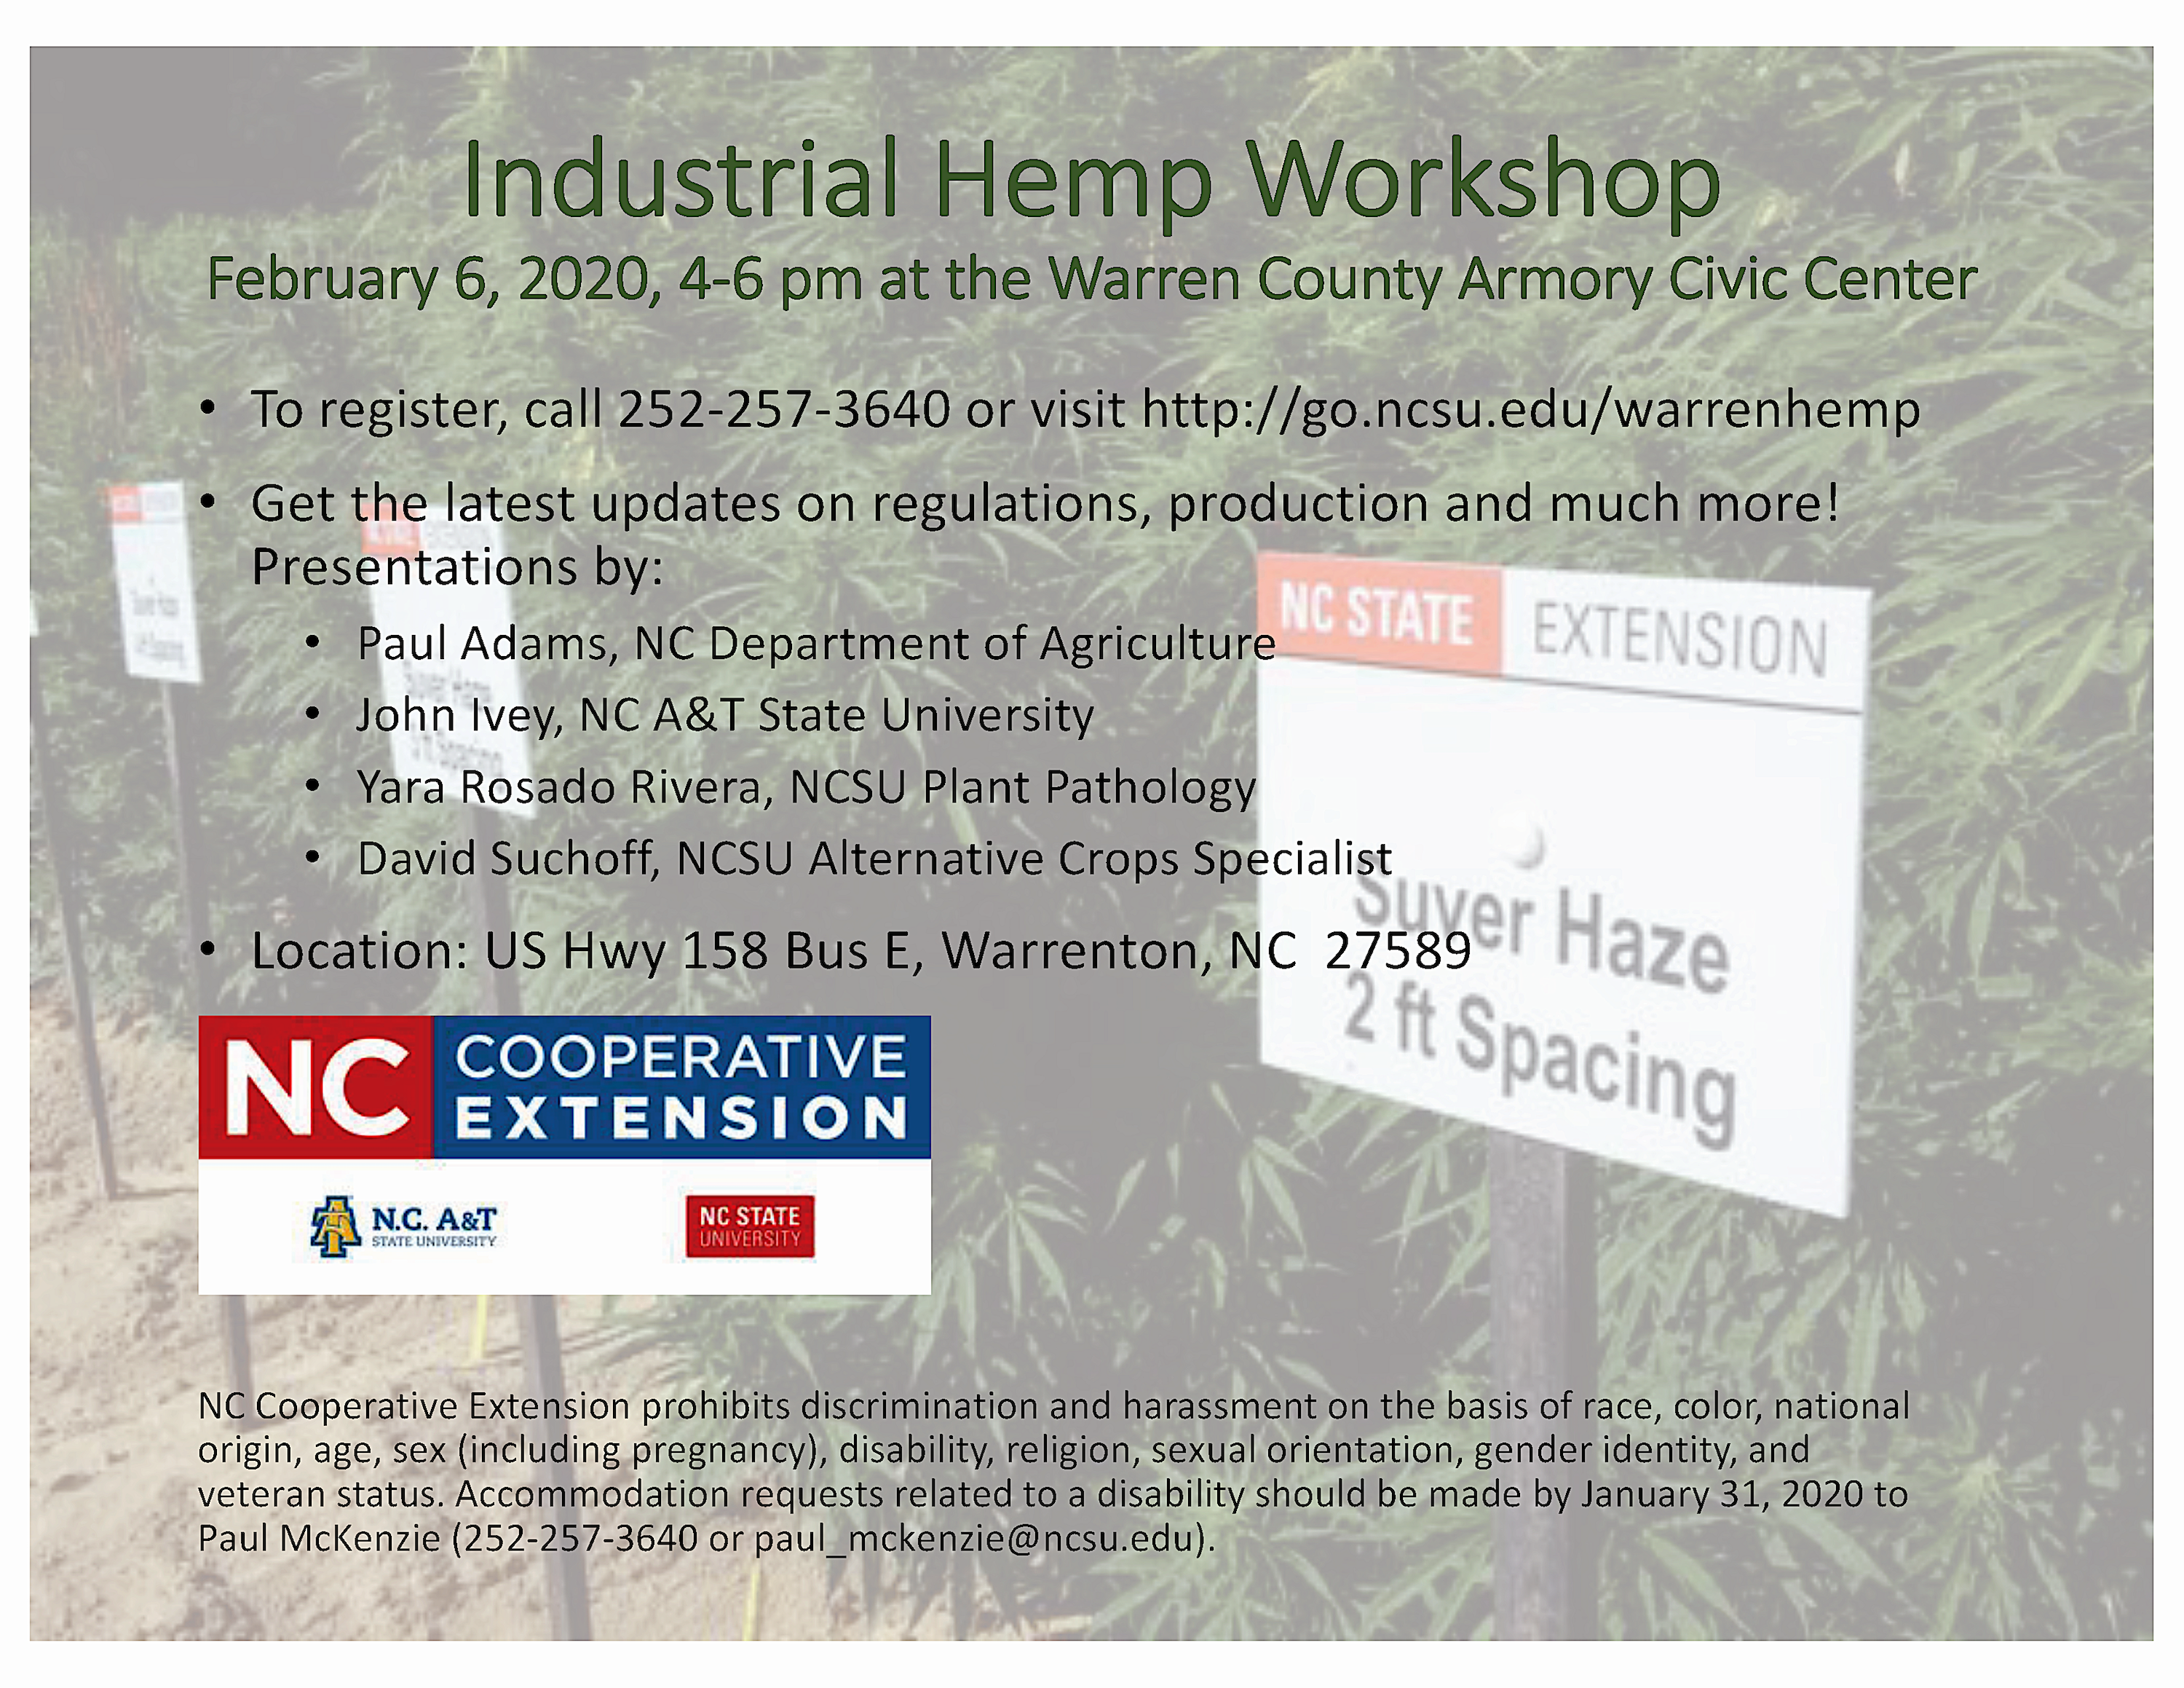 Image of a flyer advertising an Industrial Hemp meeting with speaker, date, time and location infromation.